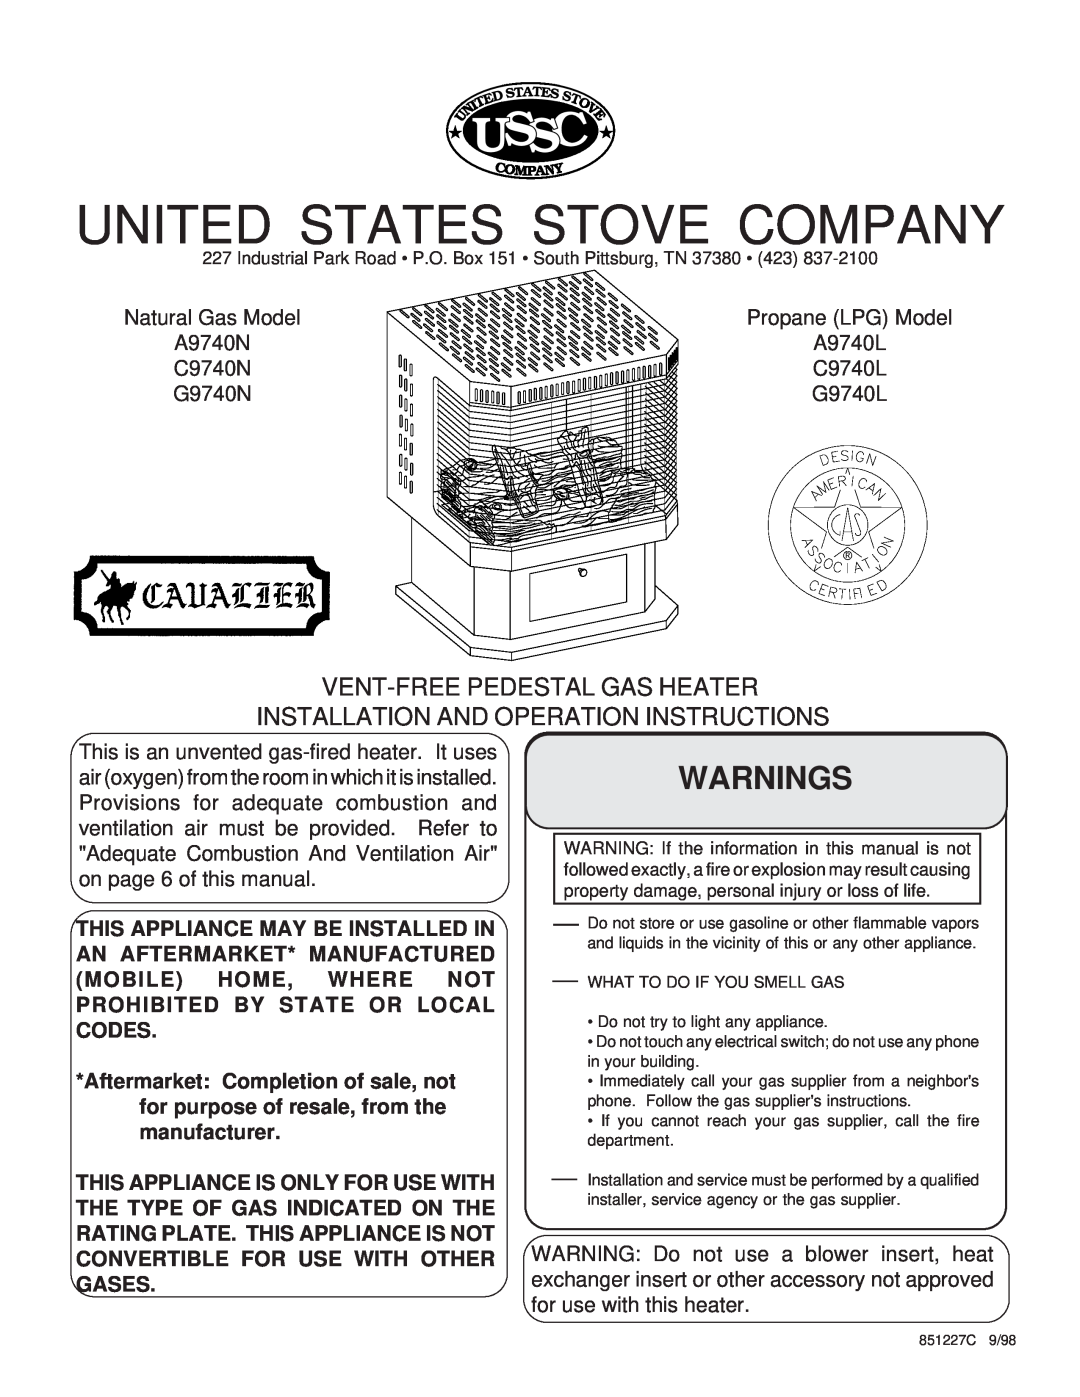 United States Stove C9740N, G9740L, A9740N, G9740N manual Ussc, Warnings, United States Stove Company, Es S, 851227C, 9/98 